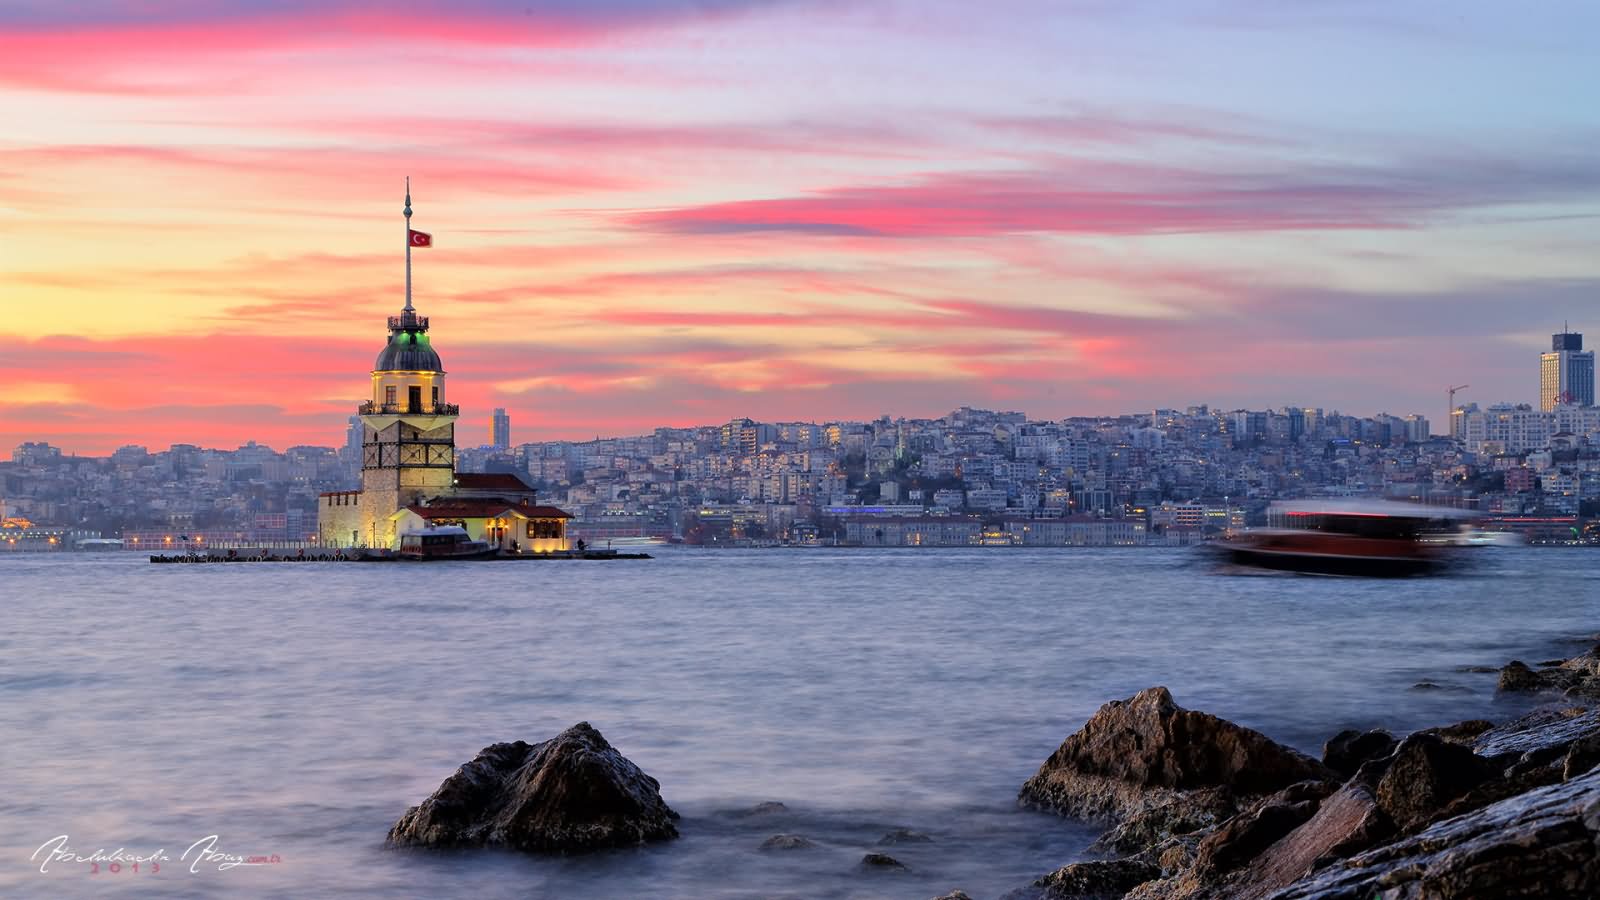 Sunset View Of The Maiden's Tower In Istanbul